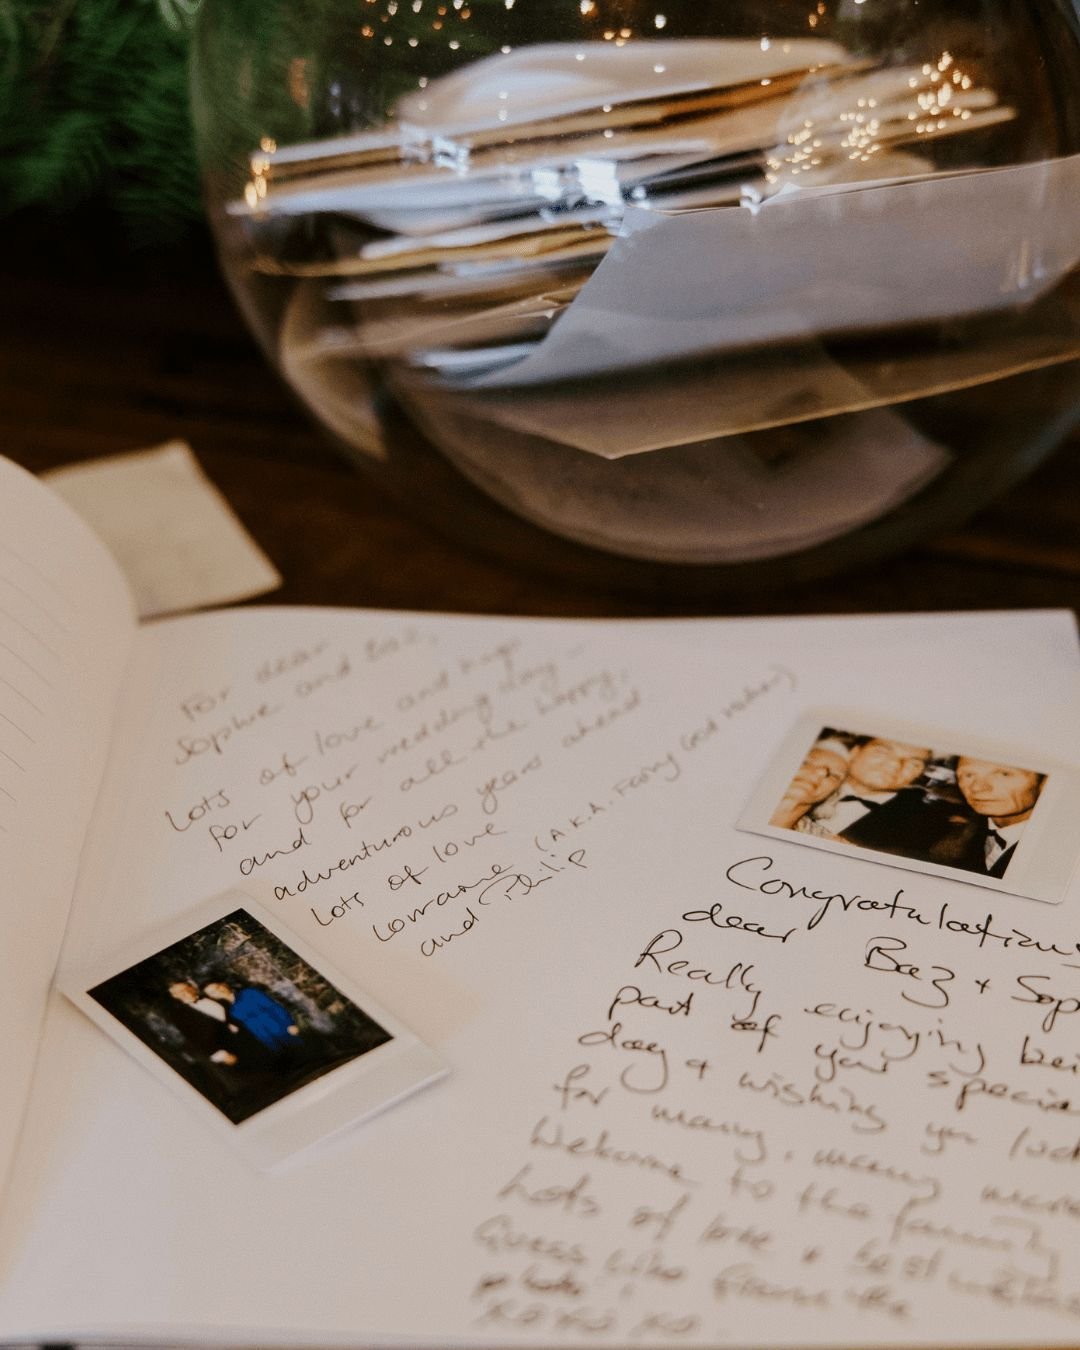 &quot;Turning moments into timeless memories with a snap! 📸✨ Polaroid insta print cameras aren&rsquo;t just about capturing shots; they&rsquo;re about crafting keepsakes that tell a story. Imagine every guest leaving their mark with a snapshot and a